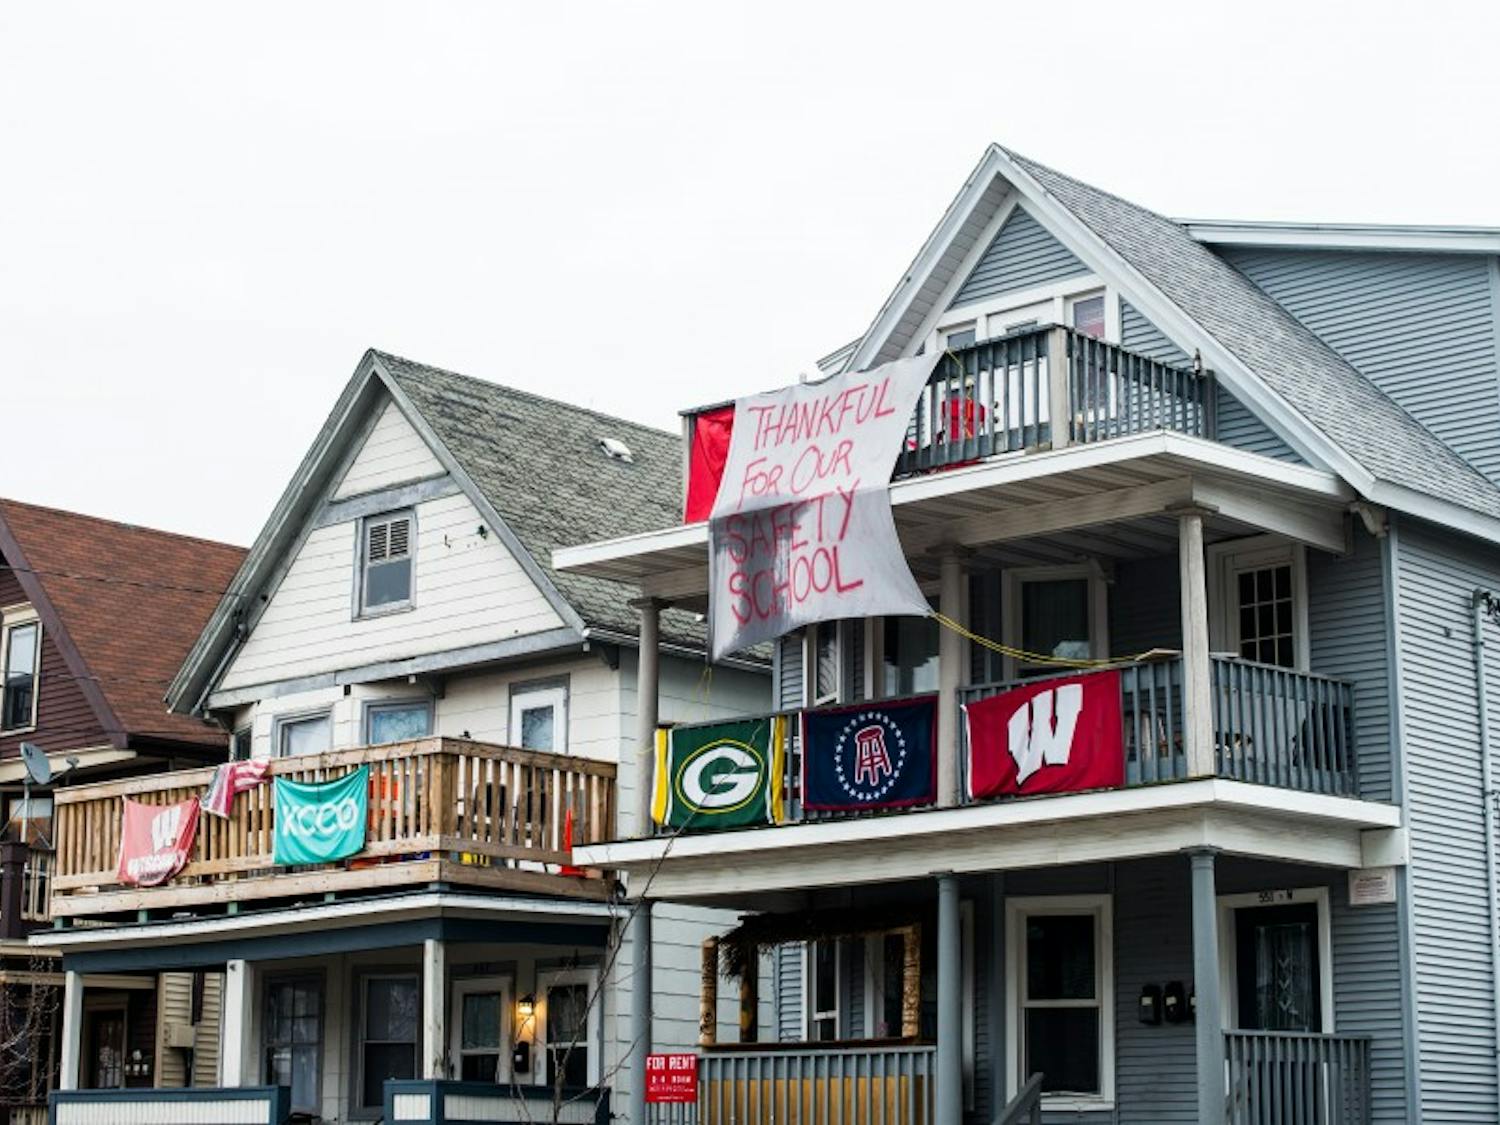 Houses on Mifflin Street usually hold hundreds of party-going UW-Madison students one Saturday at the end of spring semester, but, this year, one group of housemates will make their house an alternative space to hold discussions of the current political climate.&nbsp;